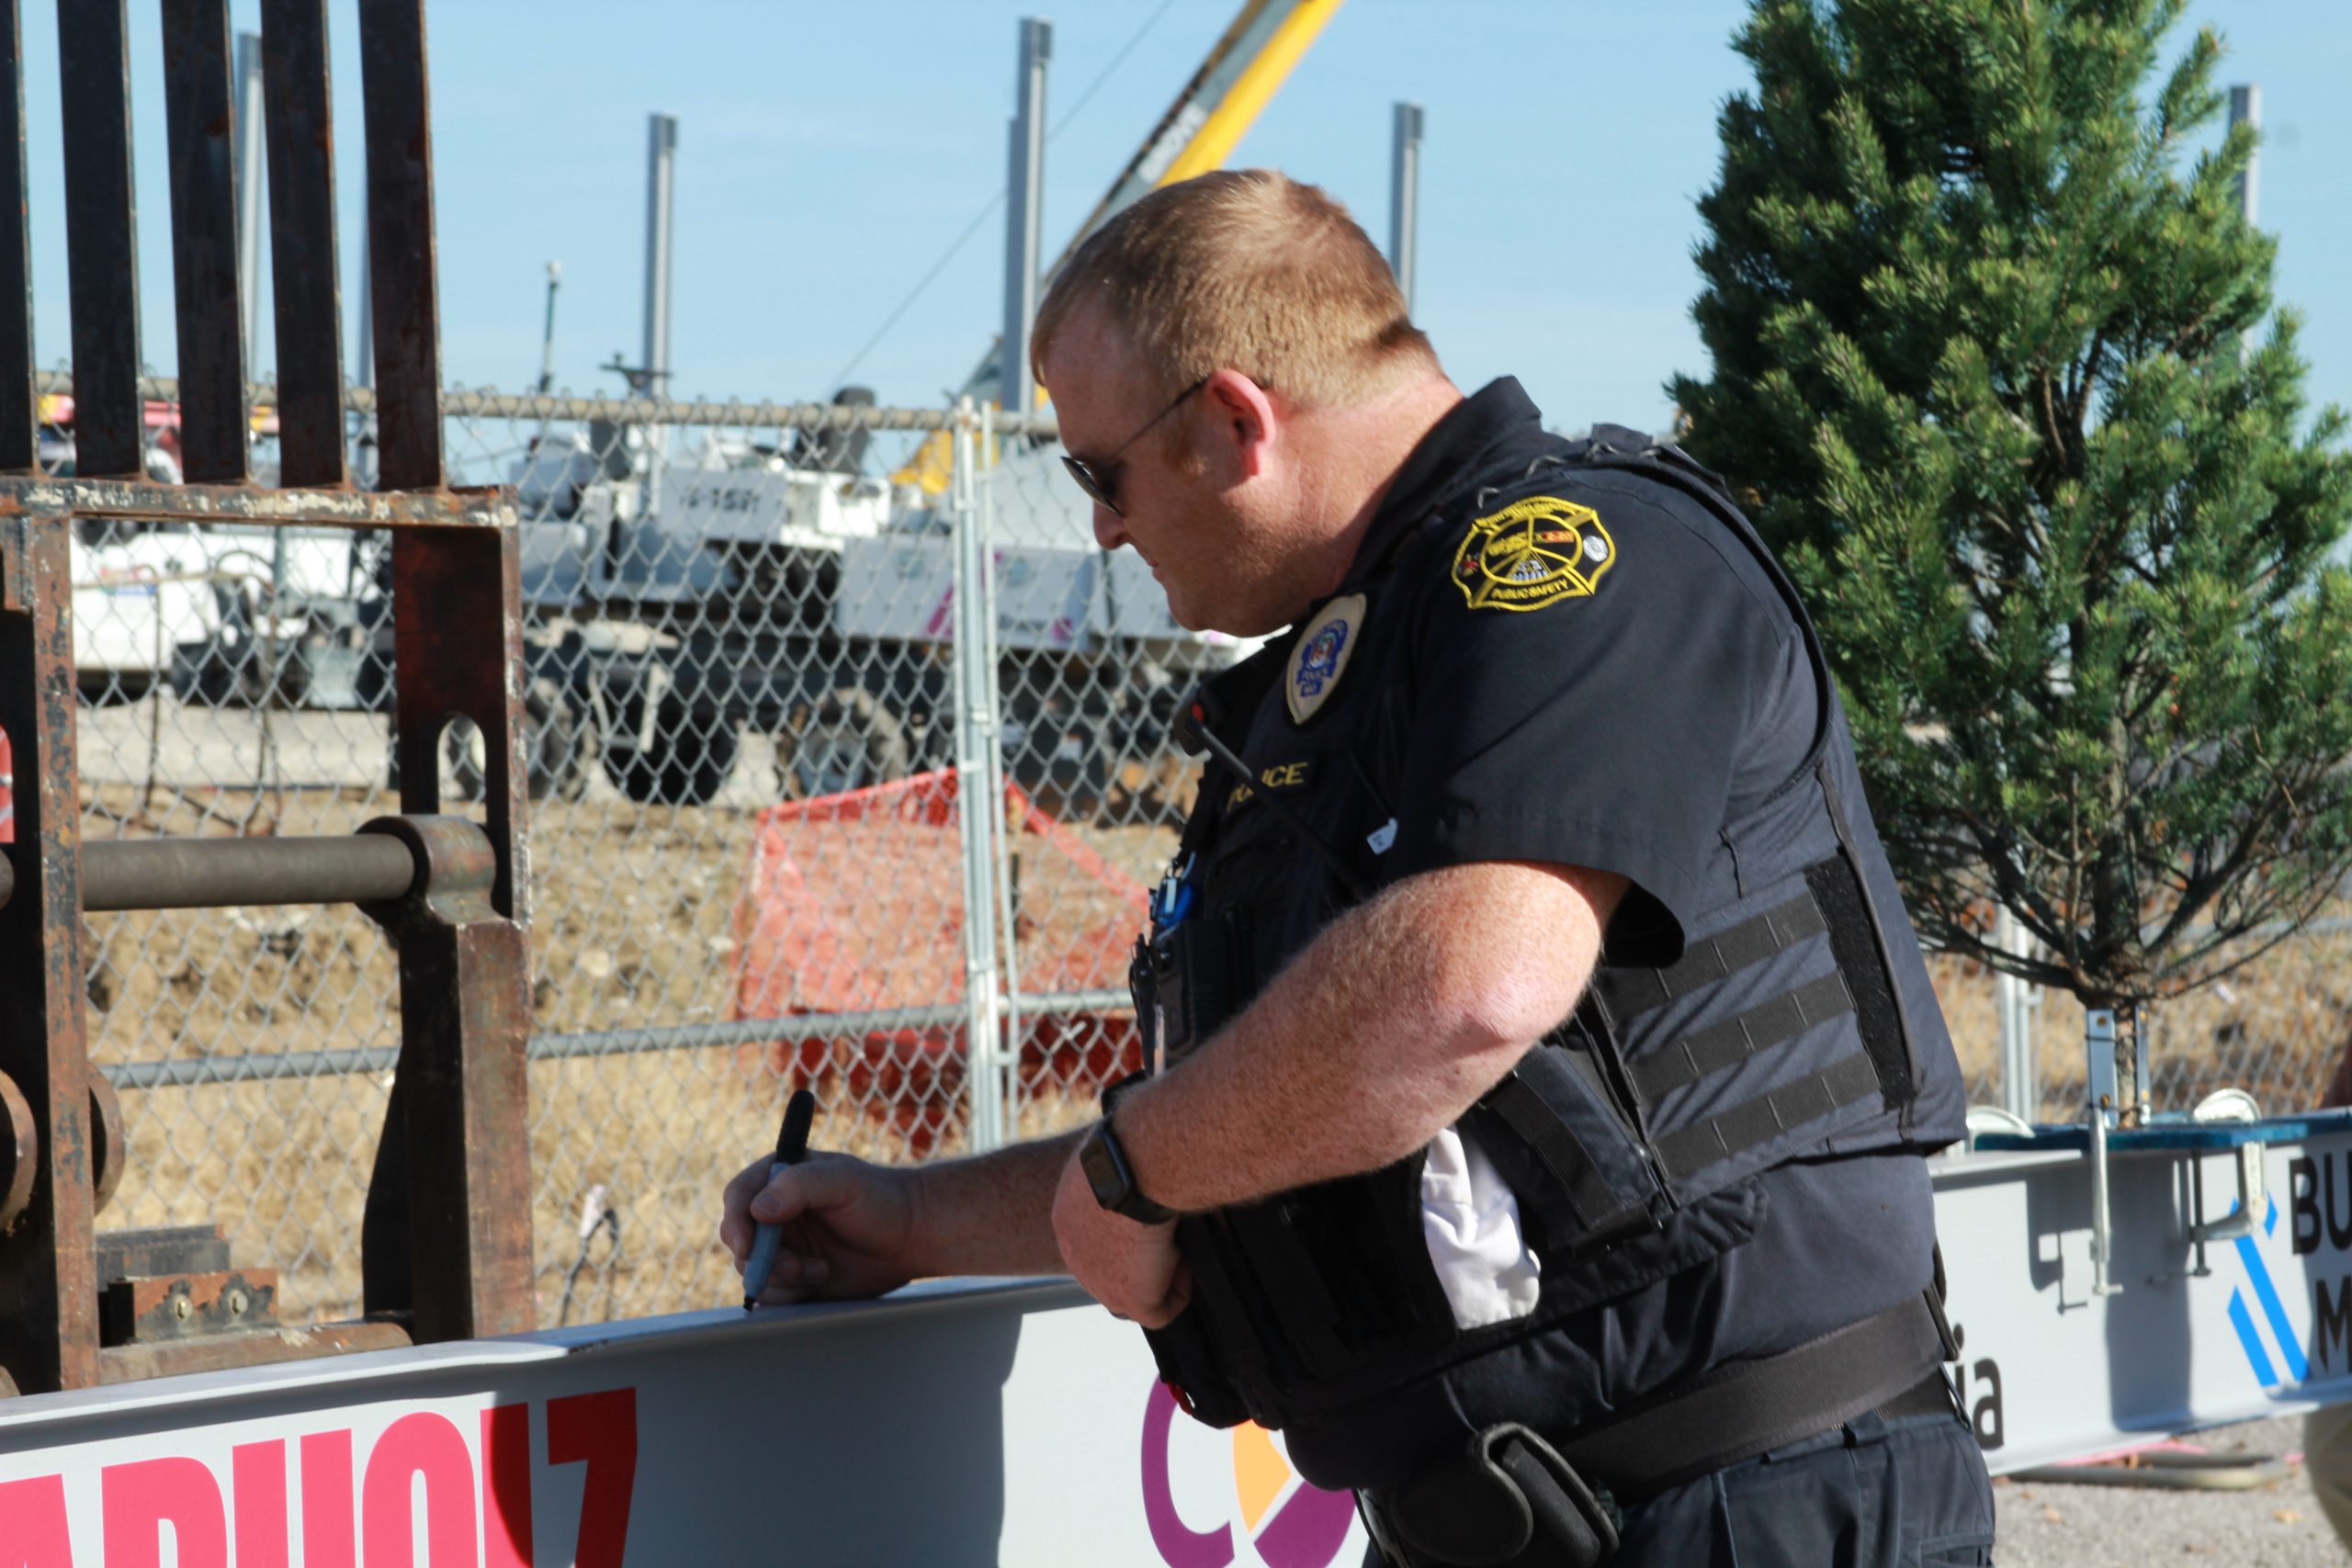 Police officer signing the beam